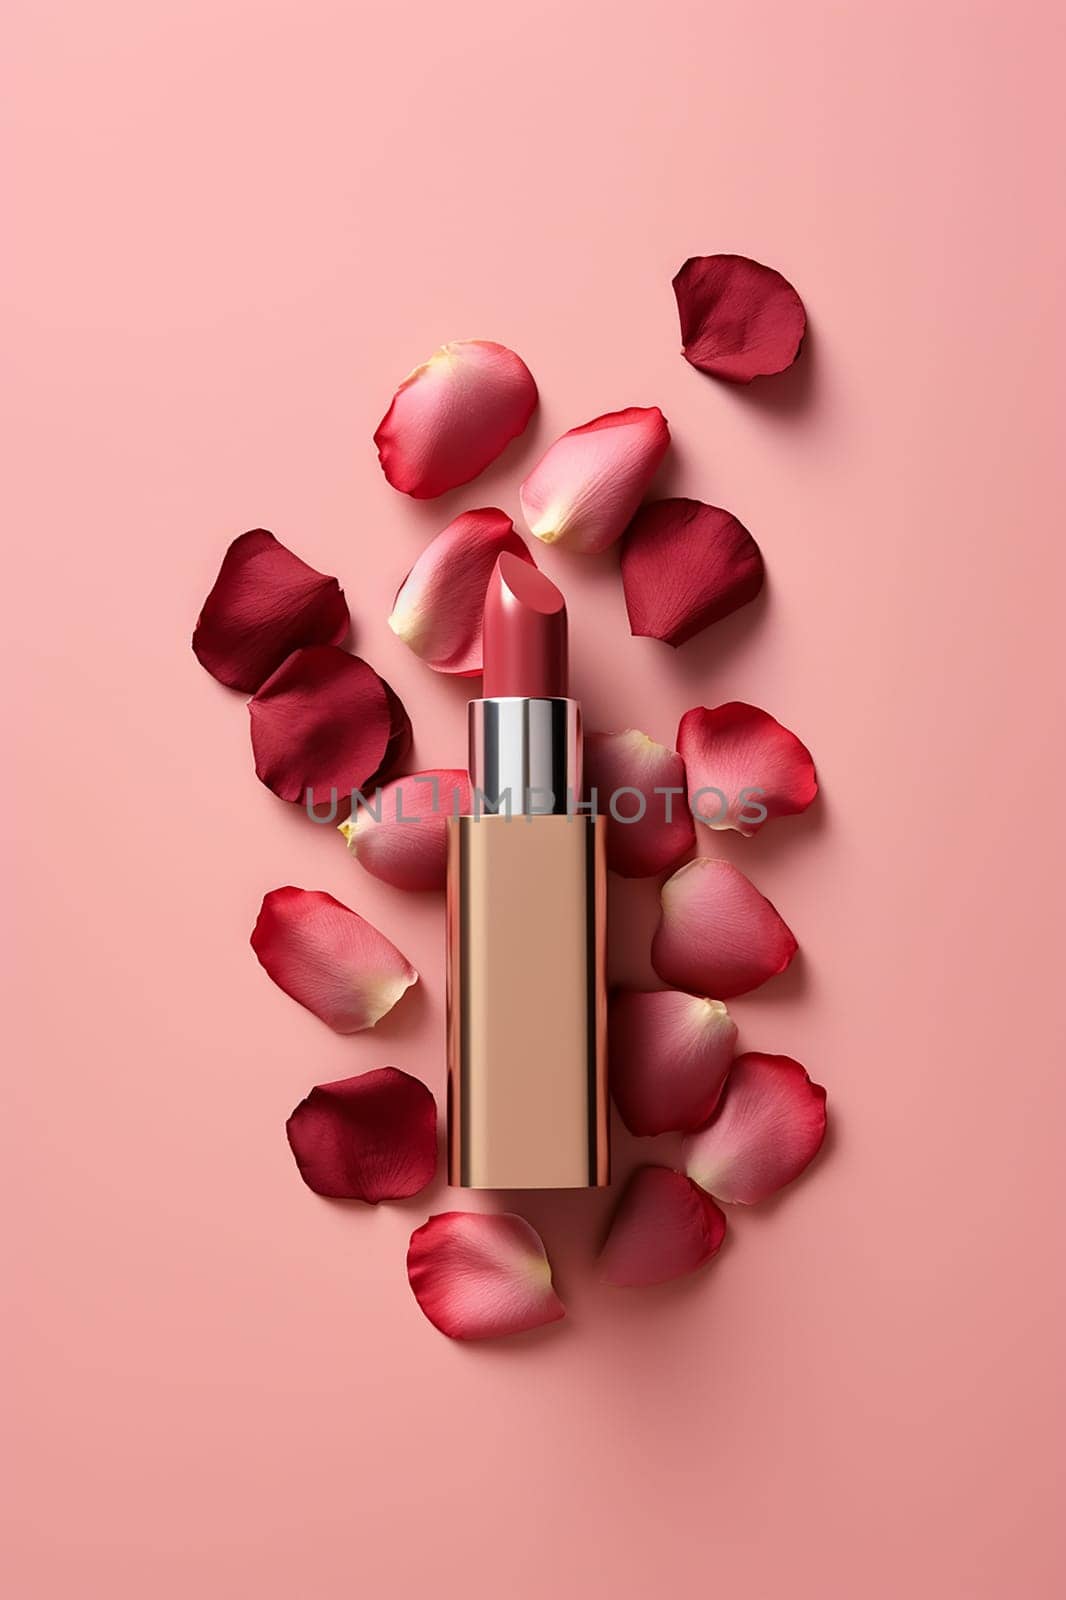 Golden lipstick surrounded by scattered rose petals on a pink background. by Hype2art